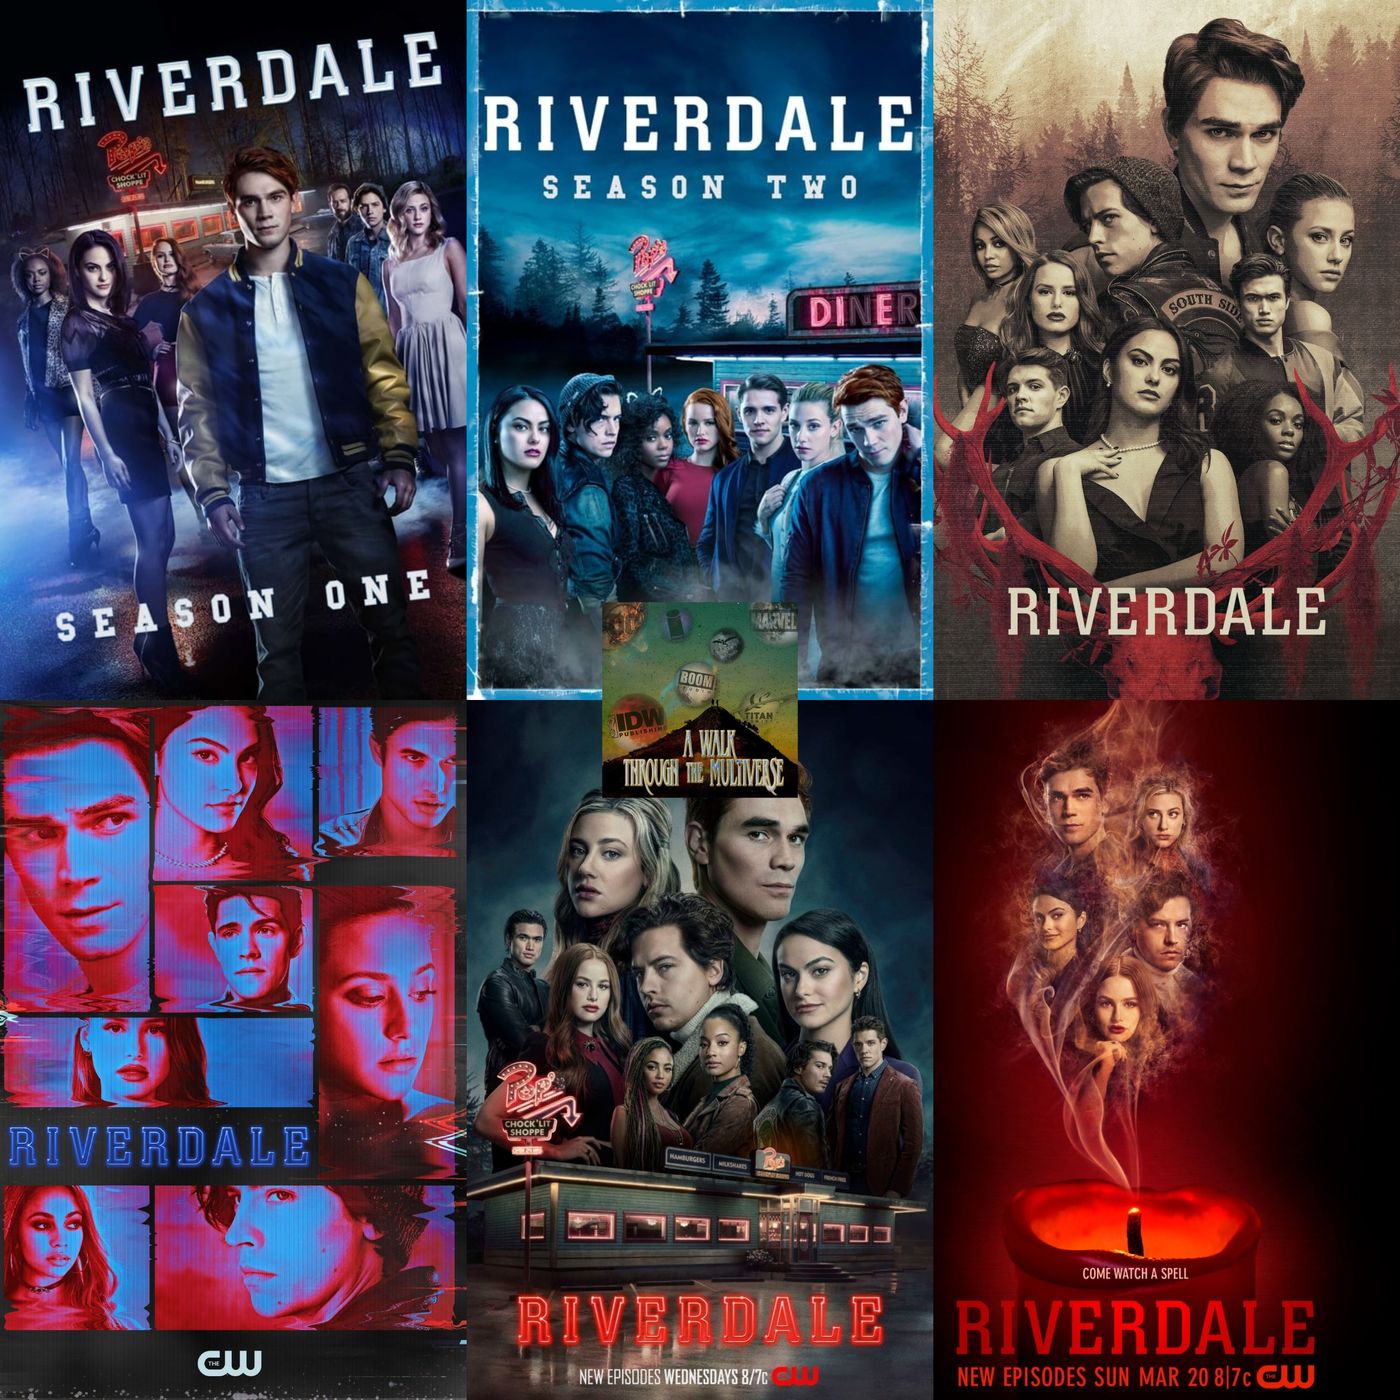 Riverdale Seasons 1-6 Catch-up with Emily - A Walk Through The Multiverse Episode 56